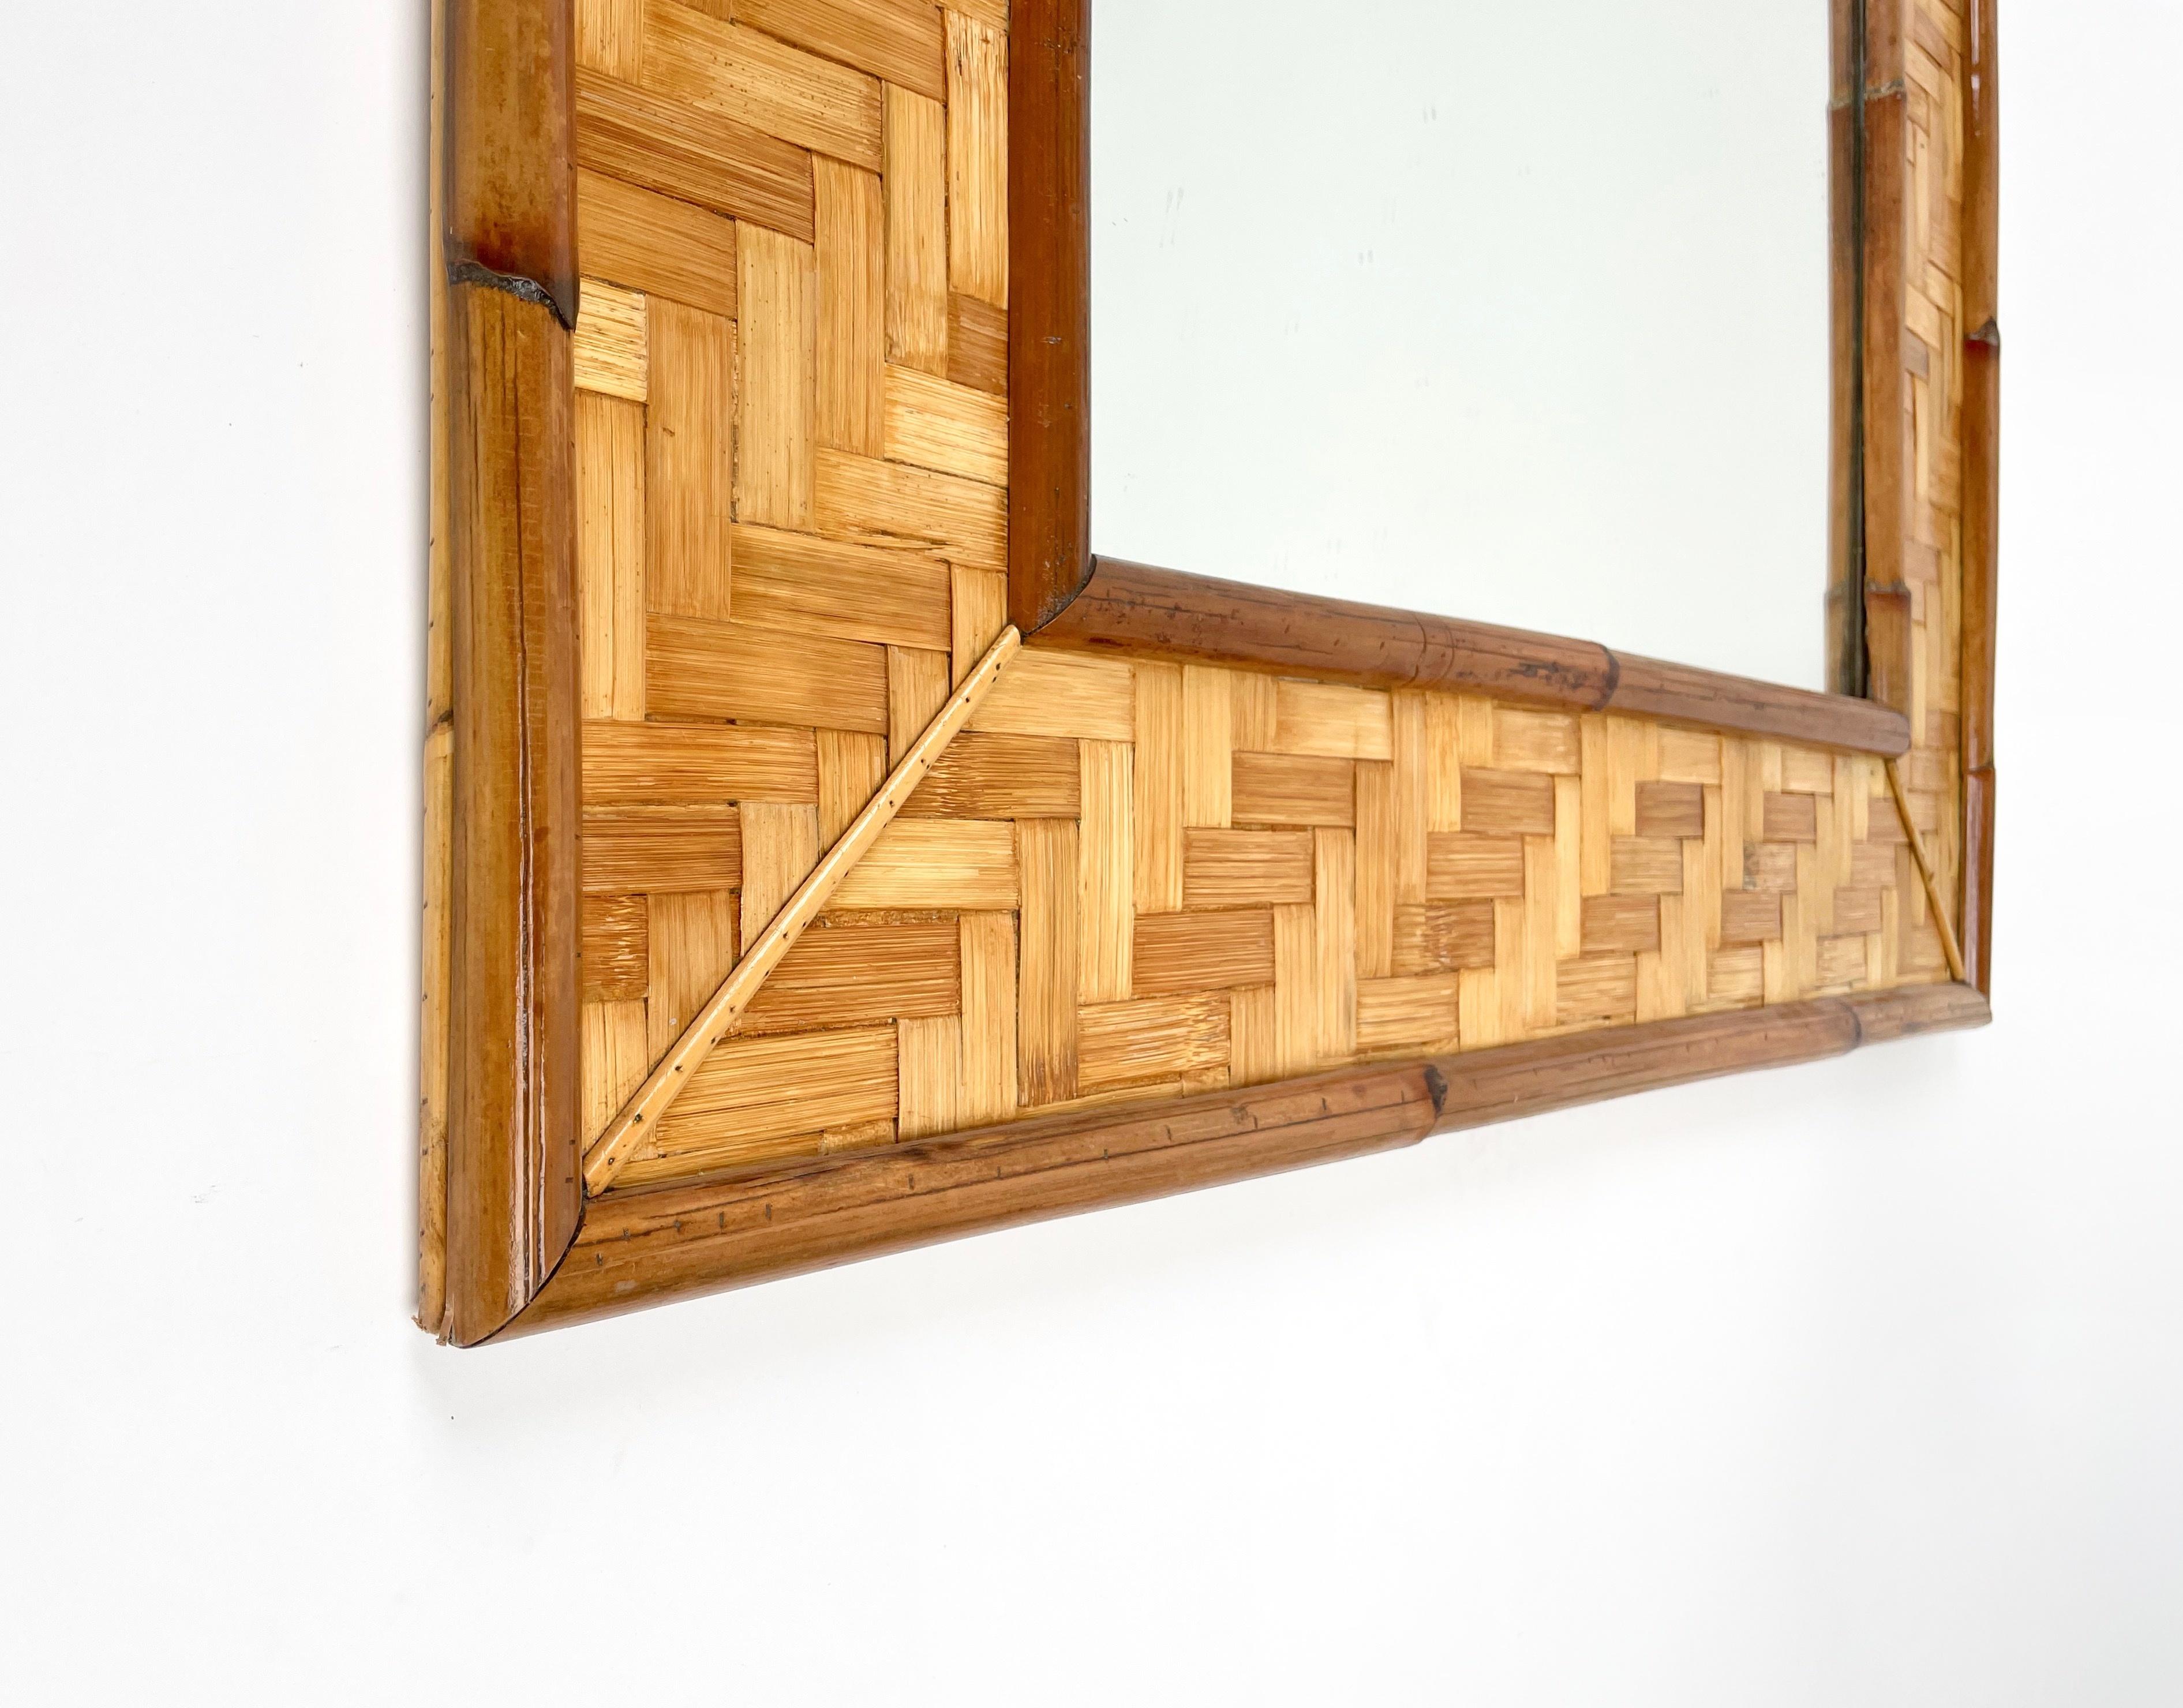 Large vintage mirror dating back to the 1970s and certainly made in Italy.
The wooden structure of this mirror is completely covered in Rattan Parquets which creates a dense texture framed by sections of bamboo and rattan canes.
This mirror comes